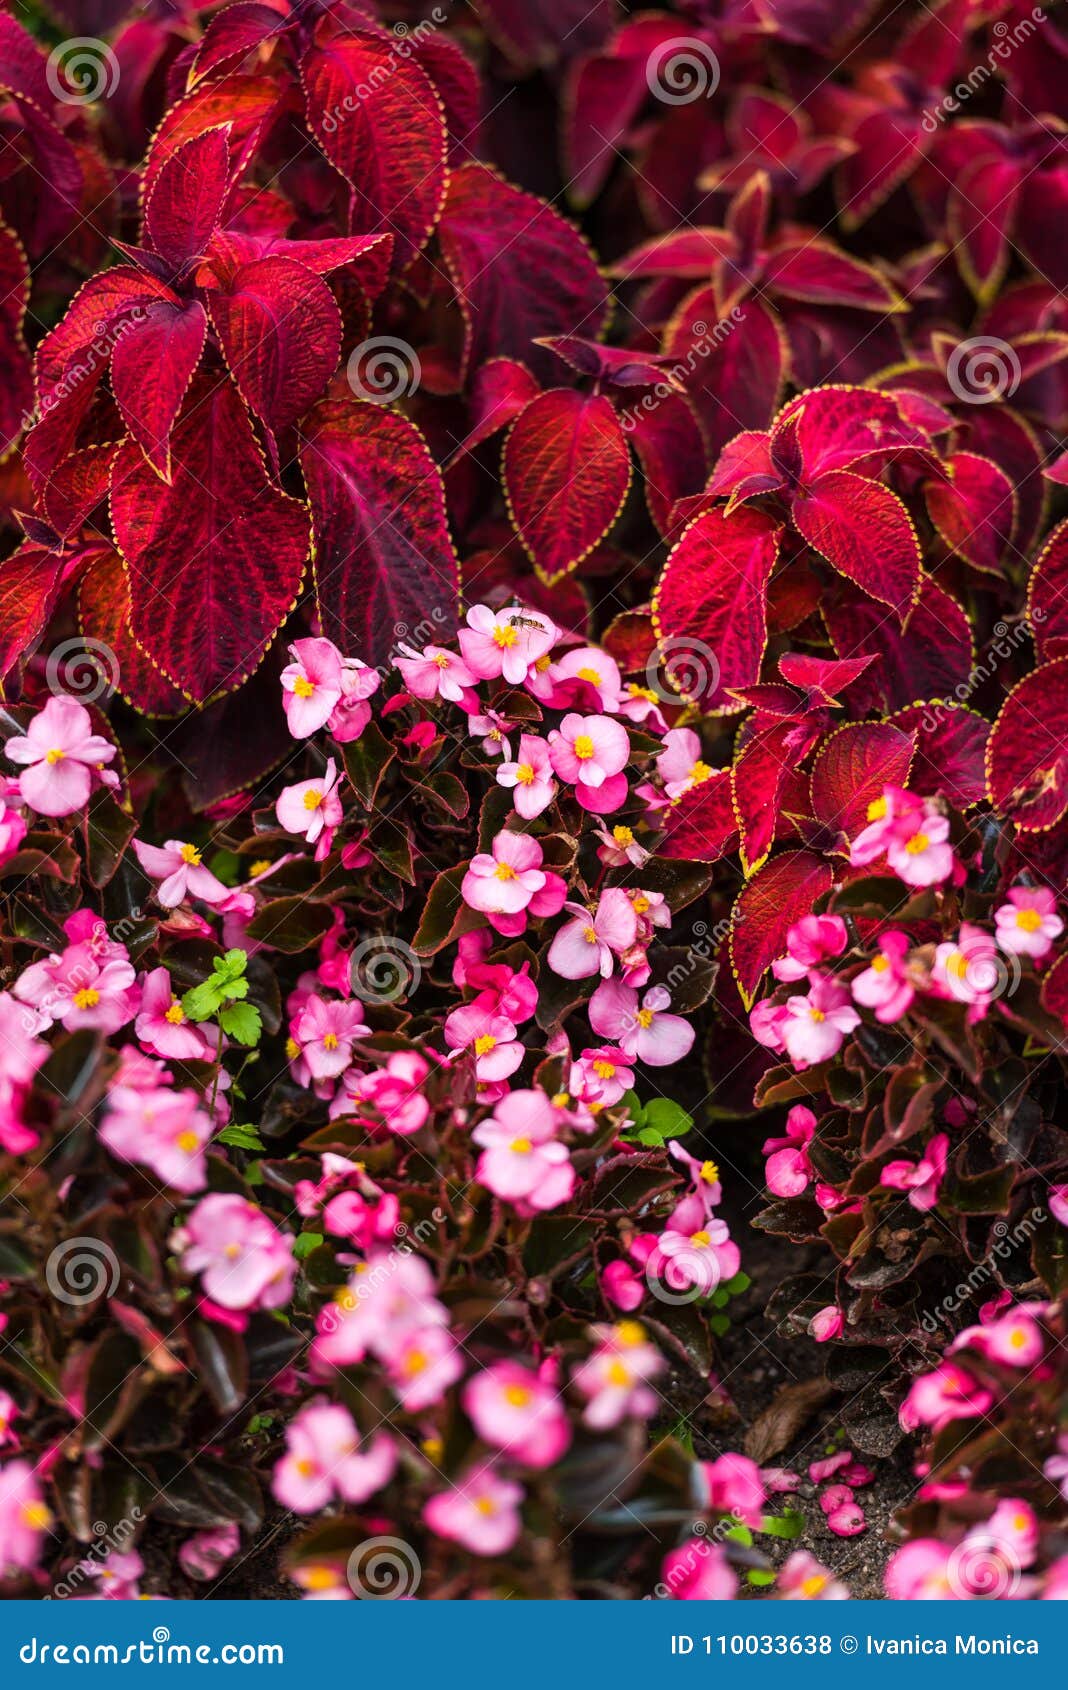 Beautiful Garden Flowers in the Sunny Day Stock Photo - Image of floral ...